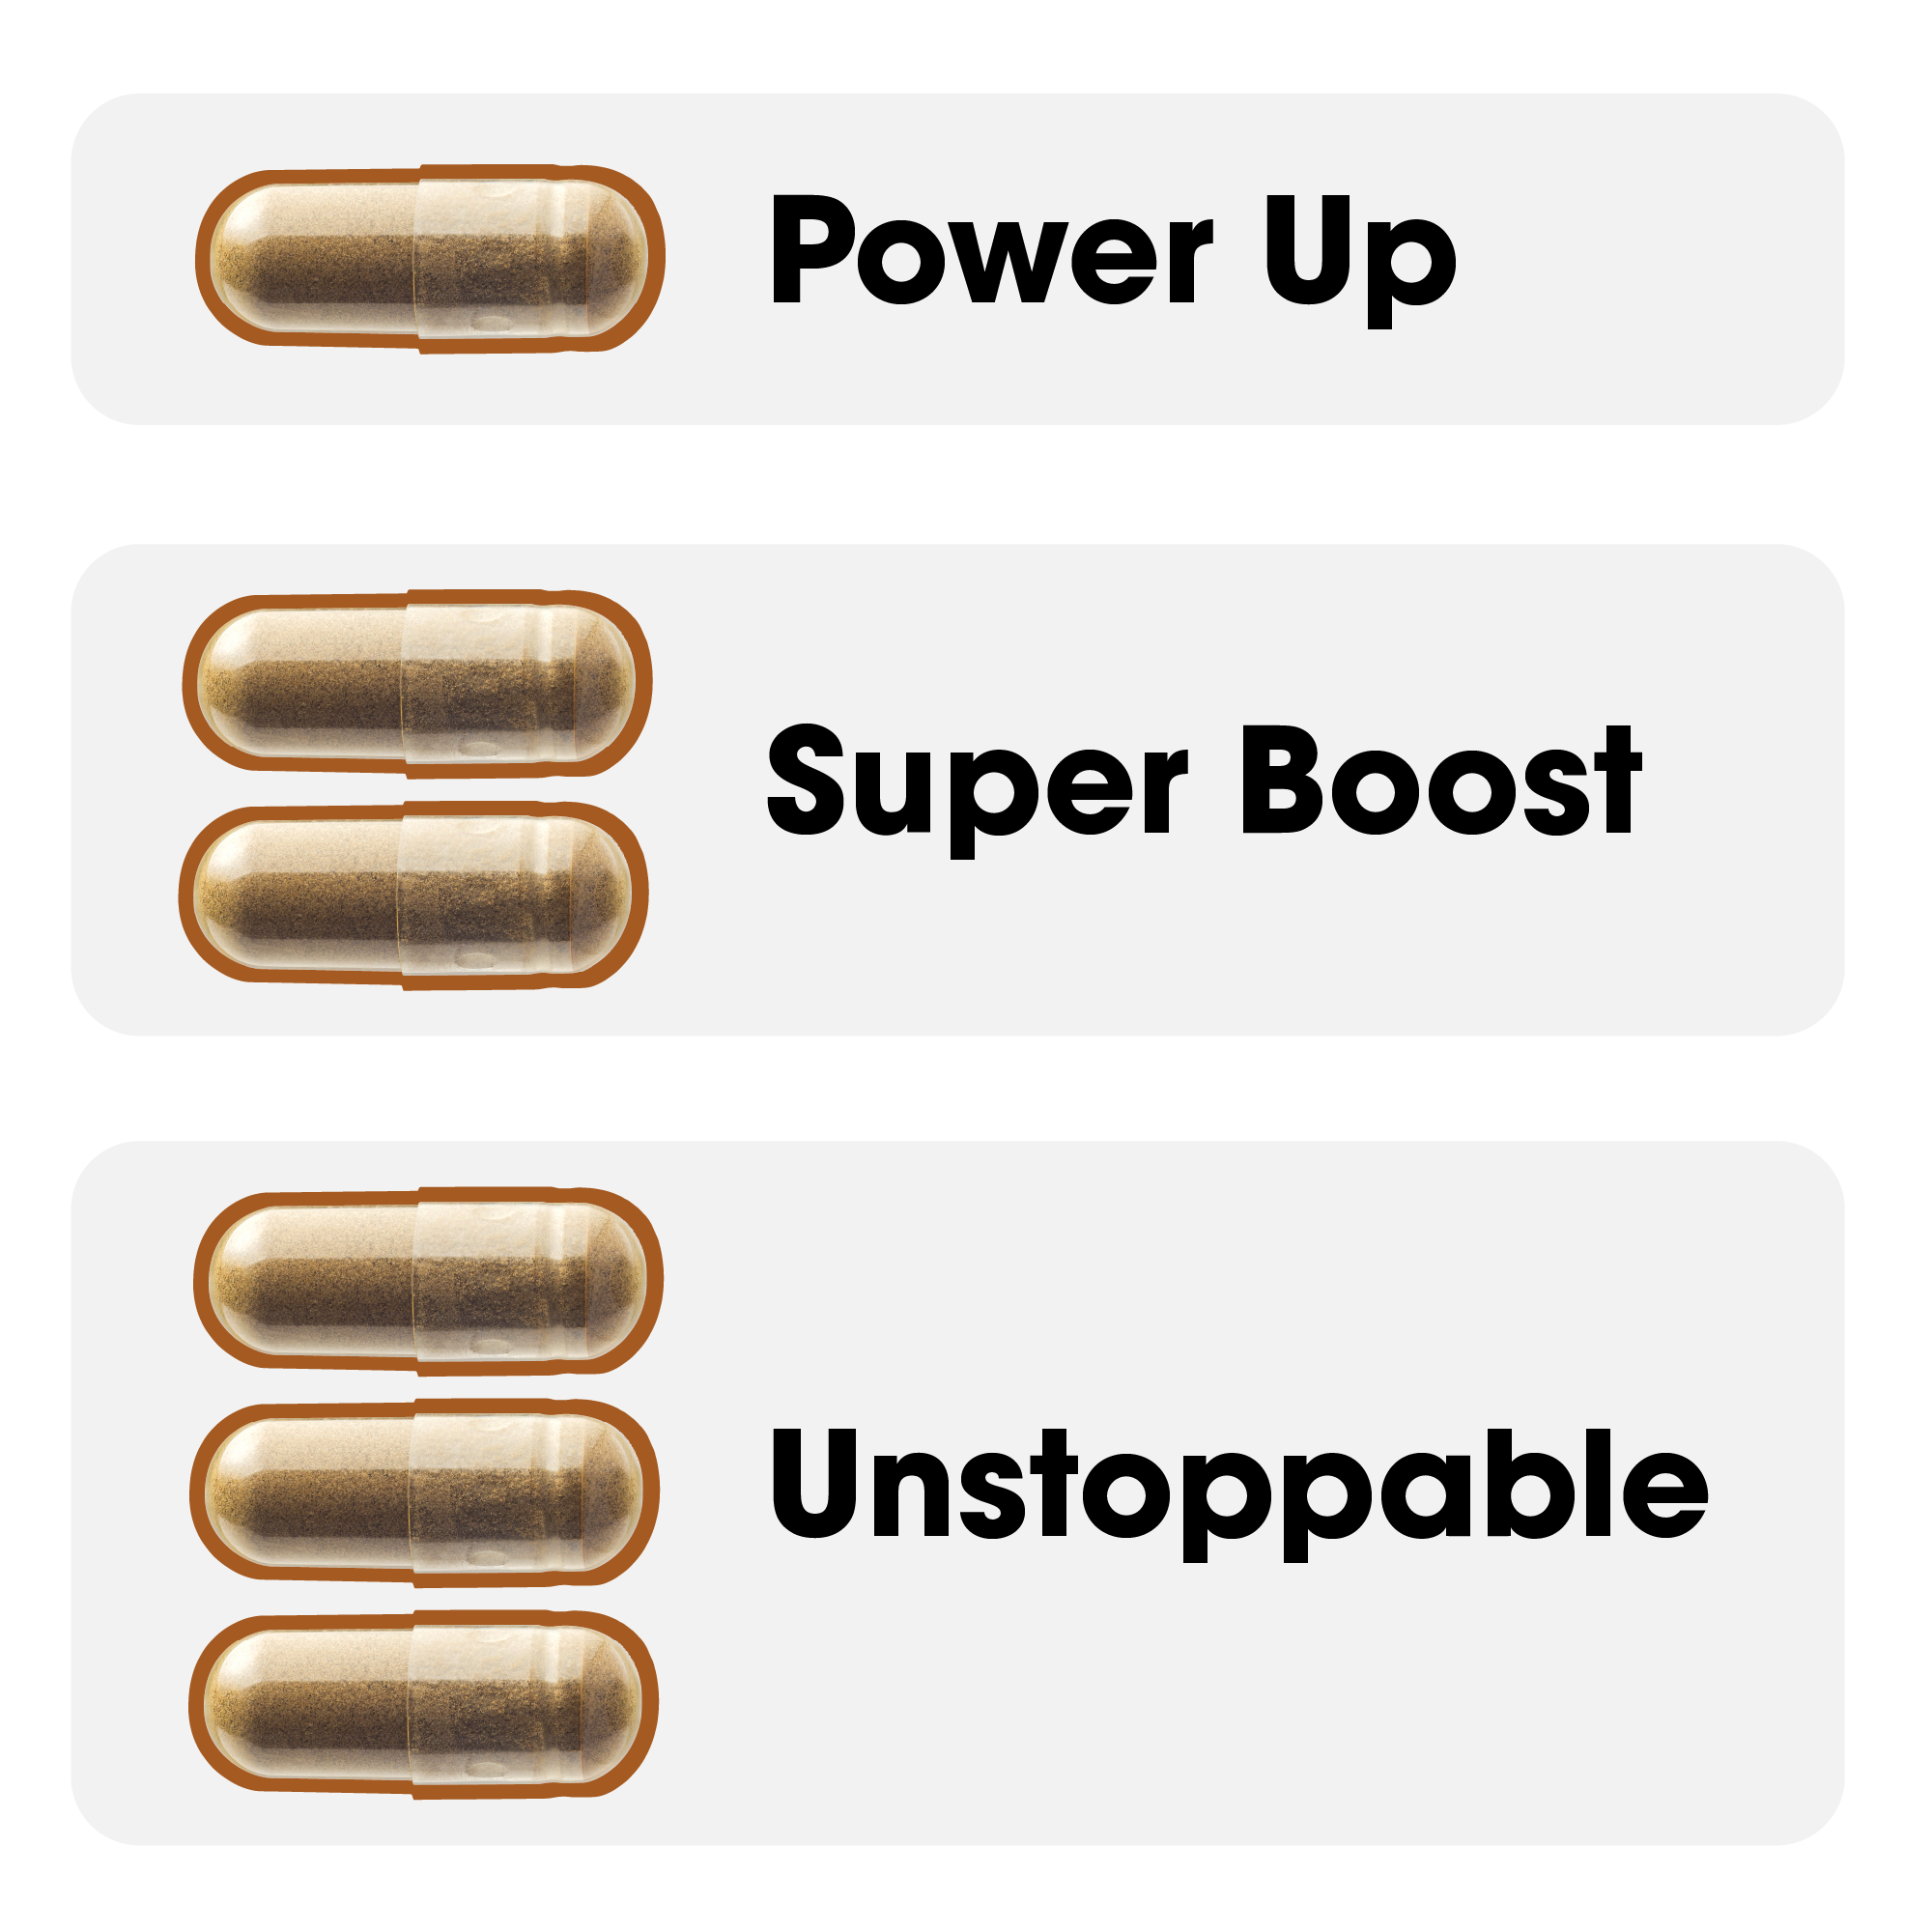 Dosages: 1 capsule represents Power Up, two capsules represents Super Boost, three capsules represent Unstoppable